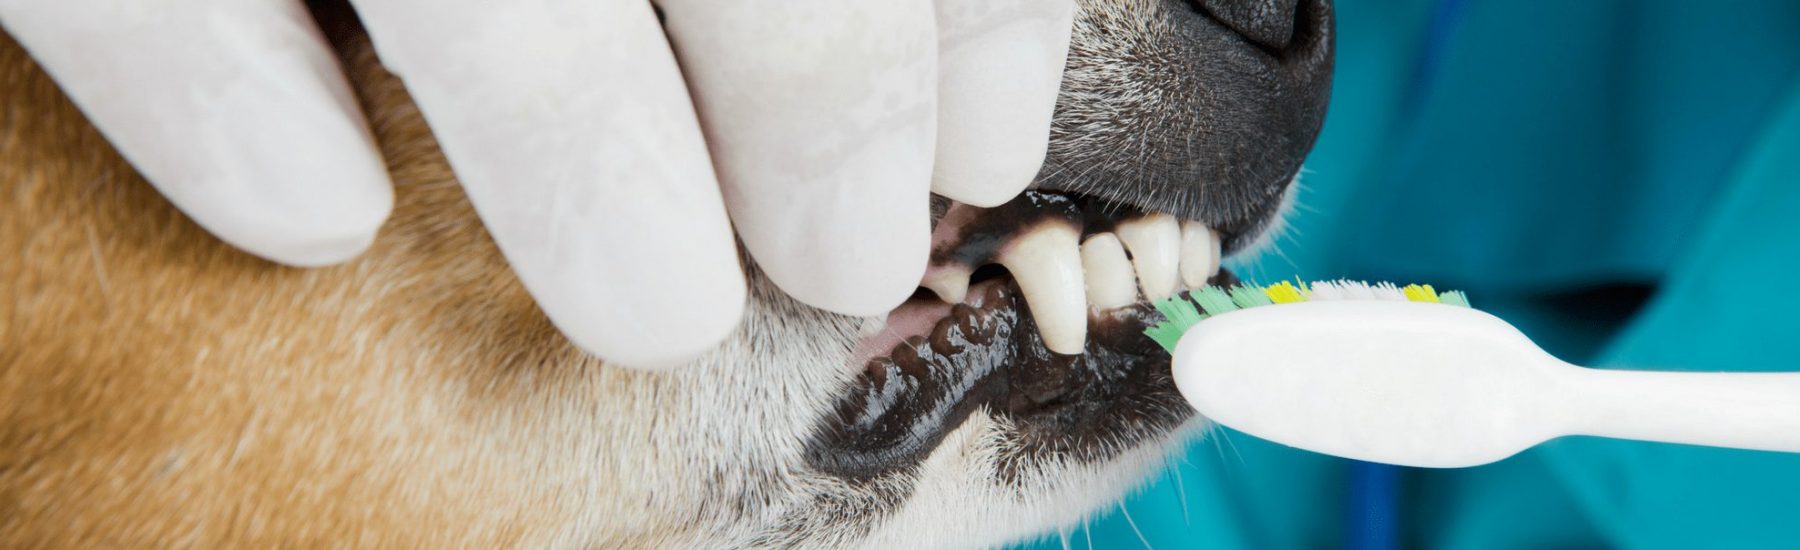 Closeup of vet cleaning a dog's teeth with a tooth brush